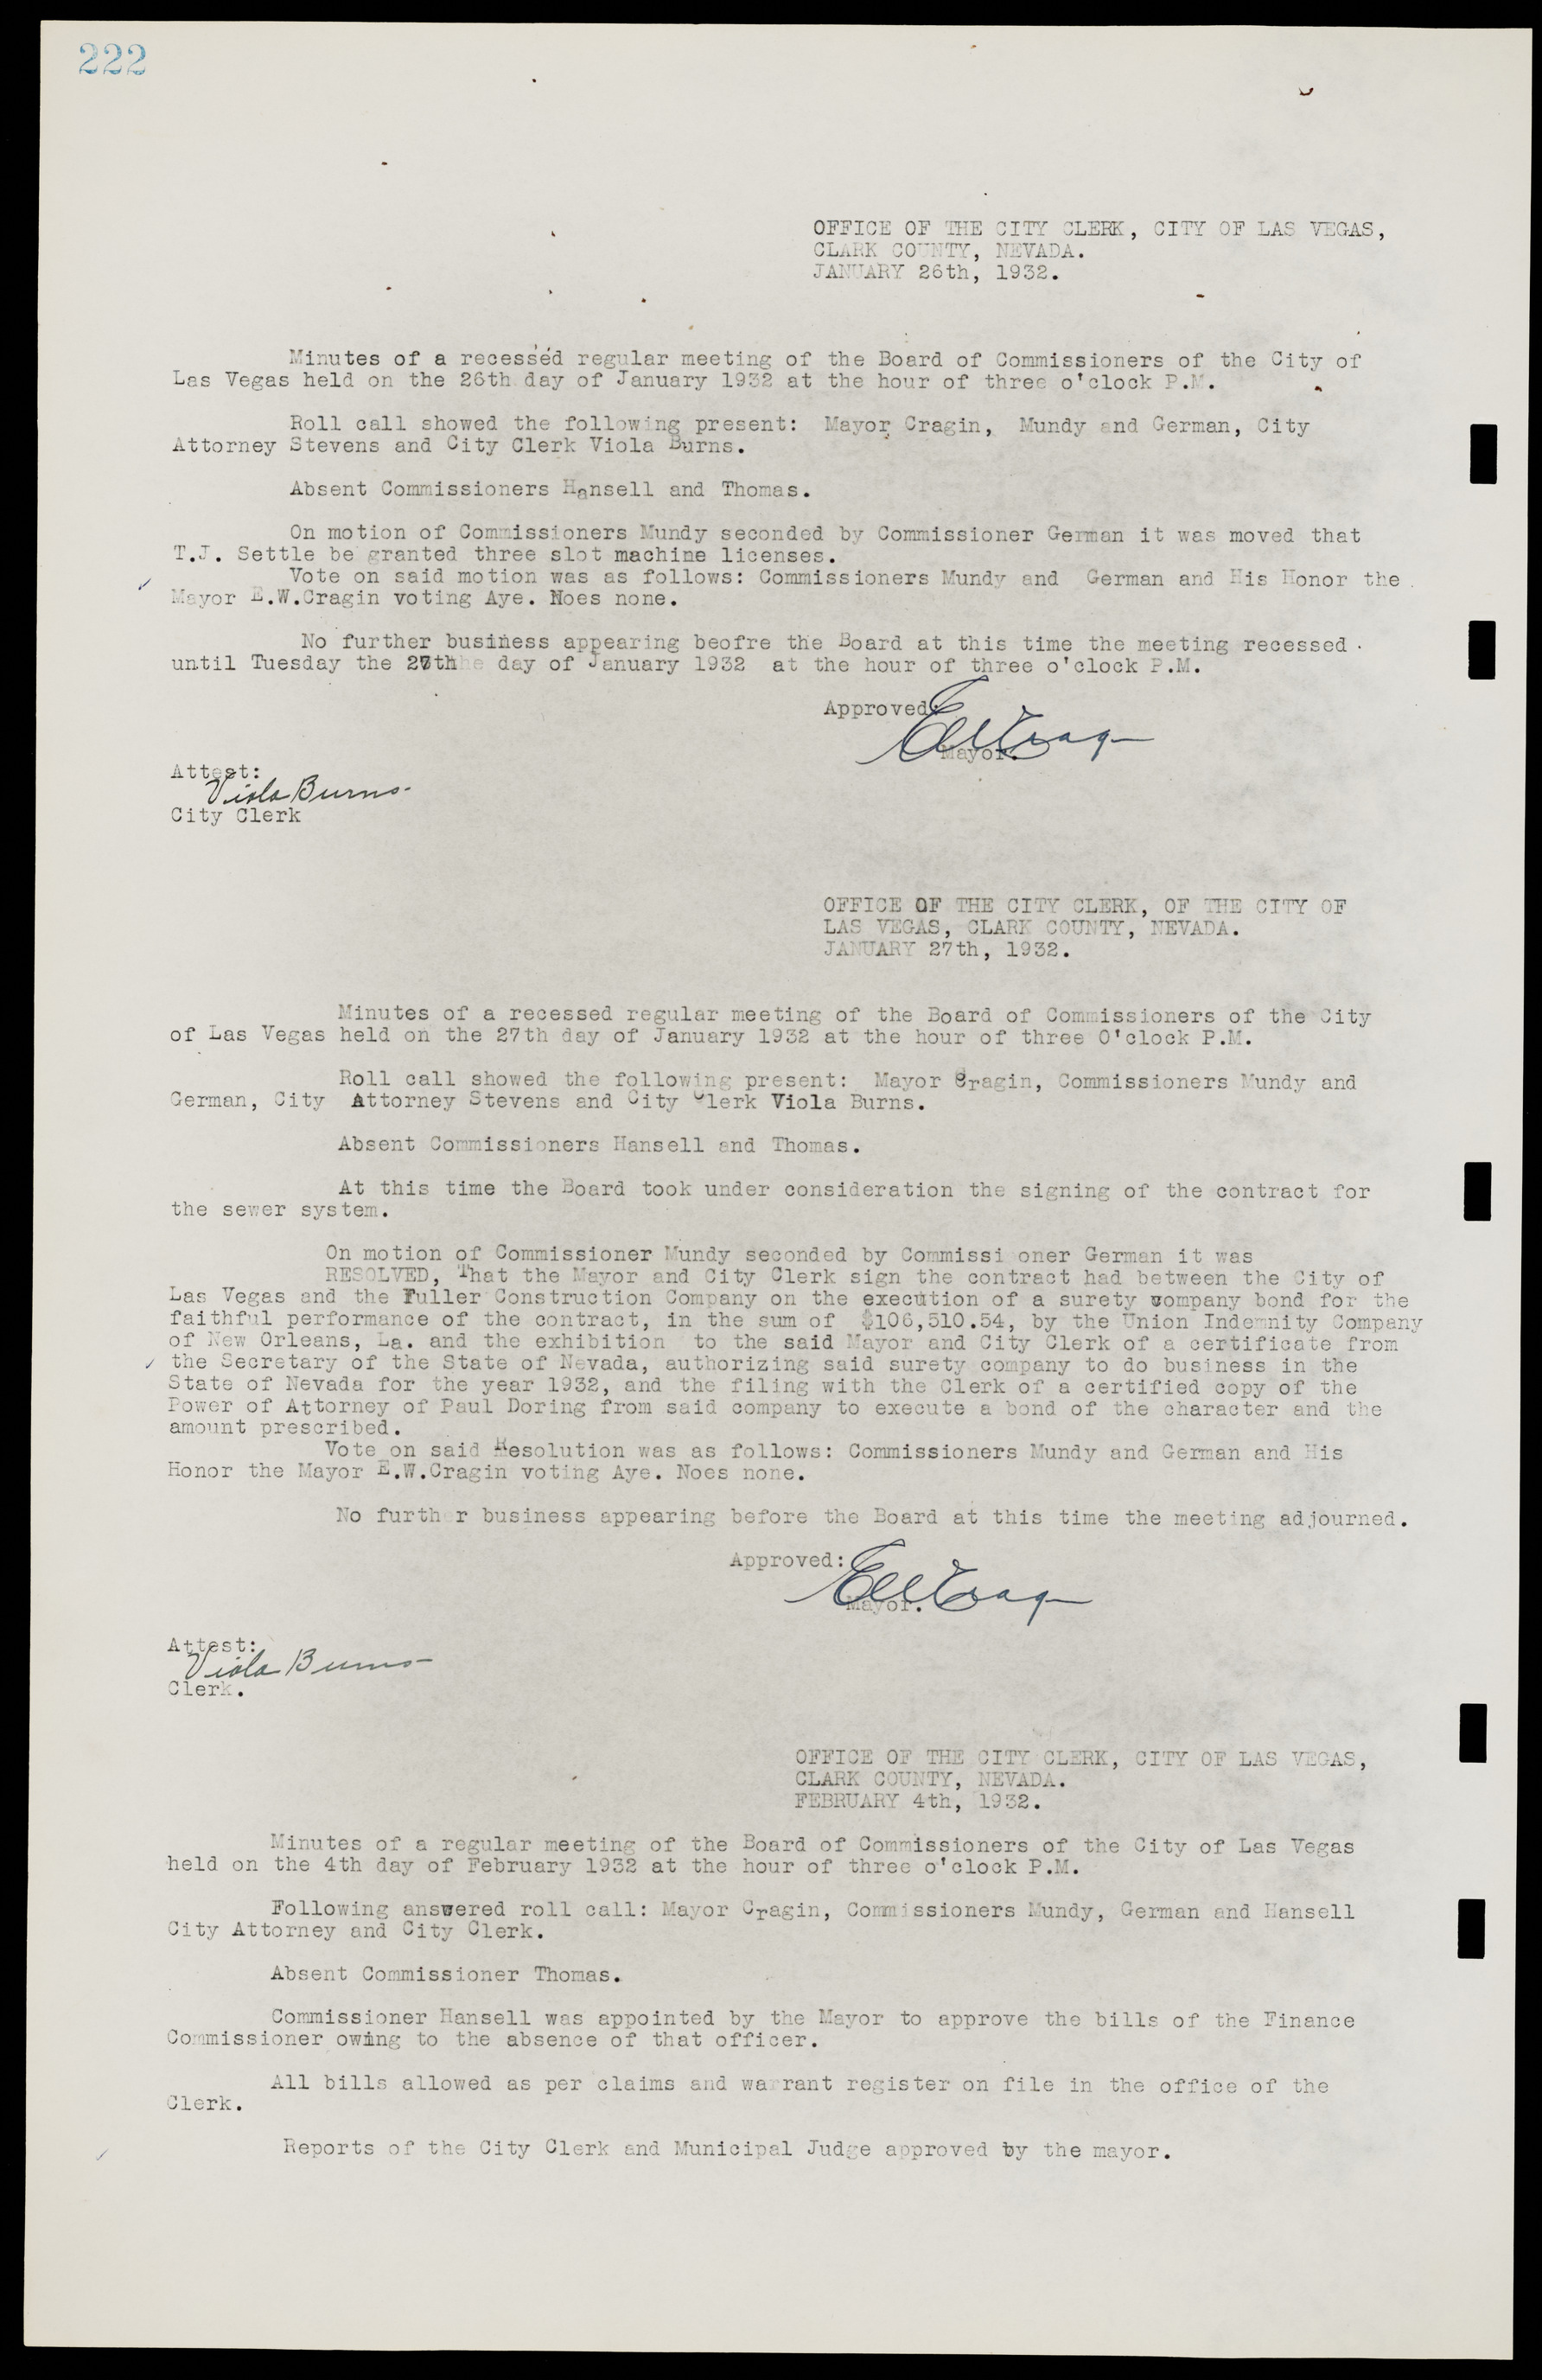 Las Vegas City Commission Minutes, May 14, 1929 to February 11, 1937, lvc000003-228